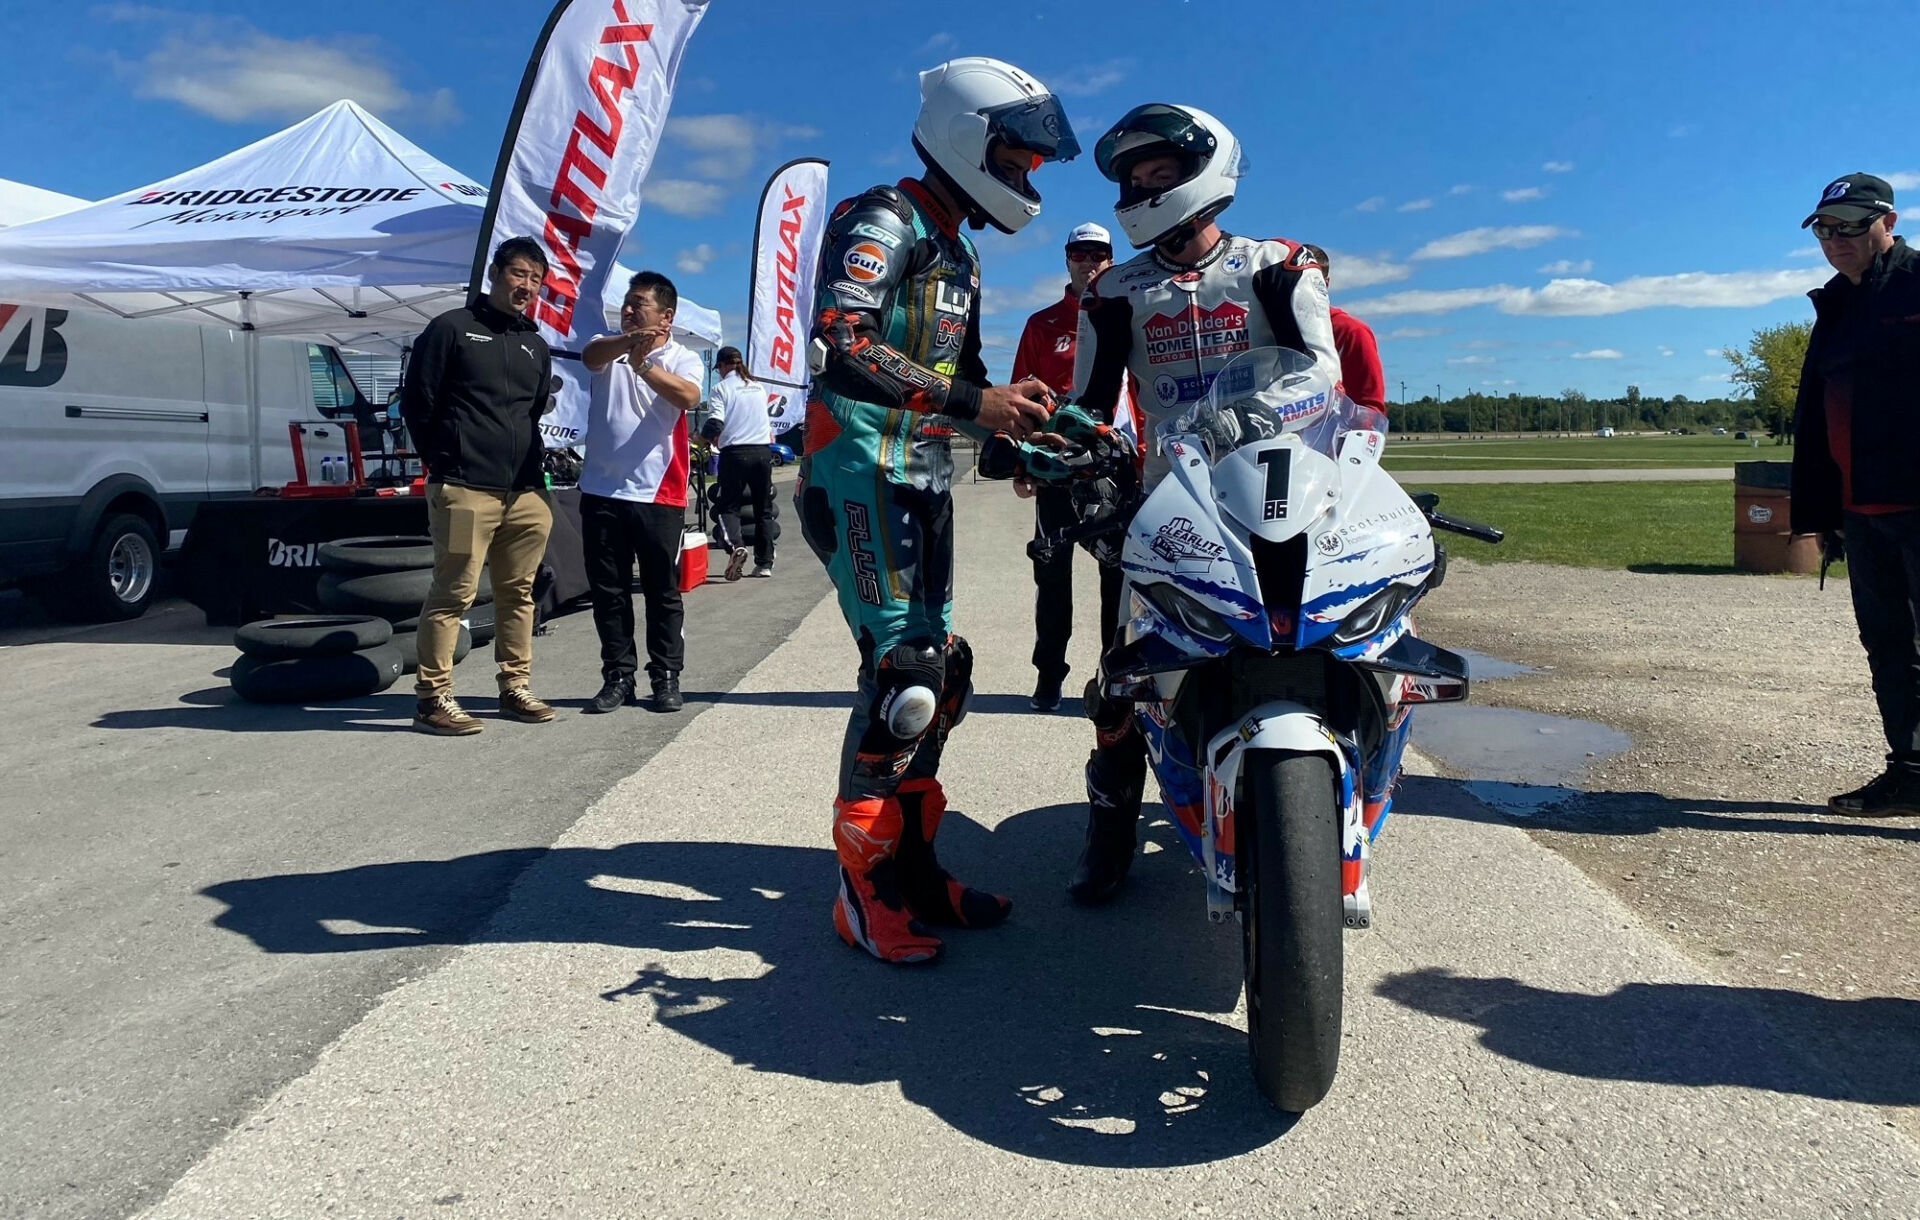 Canadian Superbike Champion Ben Young (on motorcycle) and Canadian Sport Bike Champion Trevor Dion (standing) tested Bridgestone tires under the supervision of Bridgestone engineers at Grand Bend Motorplex, in Ontario. Photo by Ross Millson, courtesy CSBK/PMP.